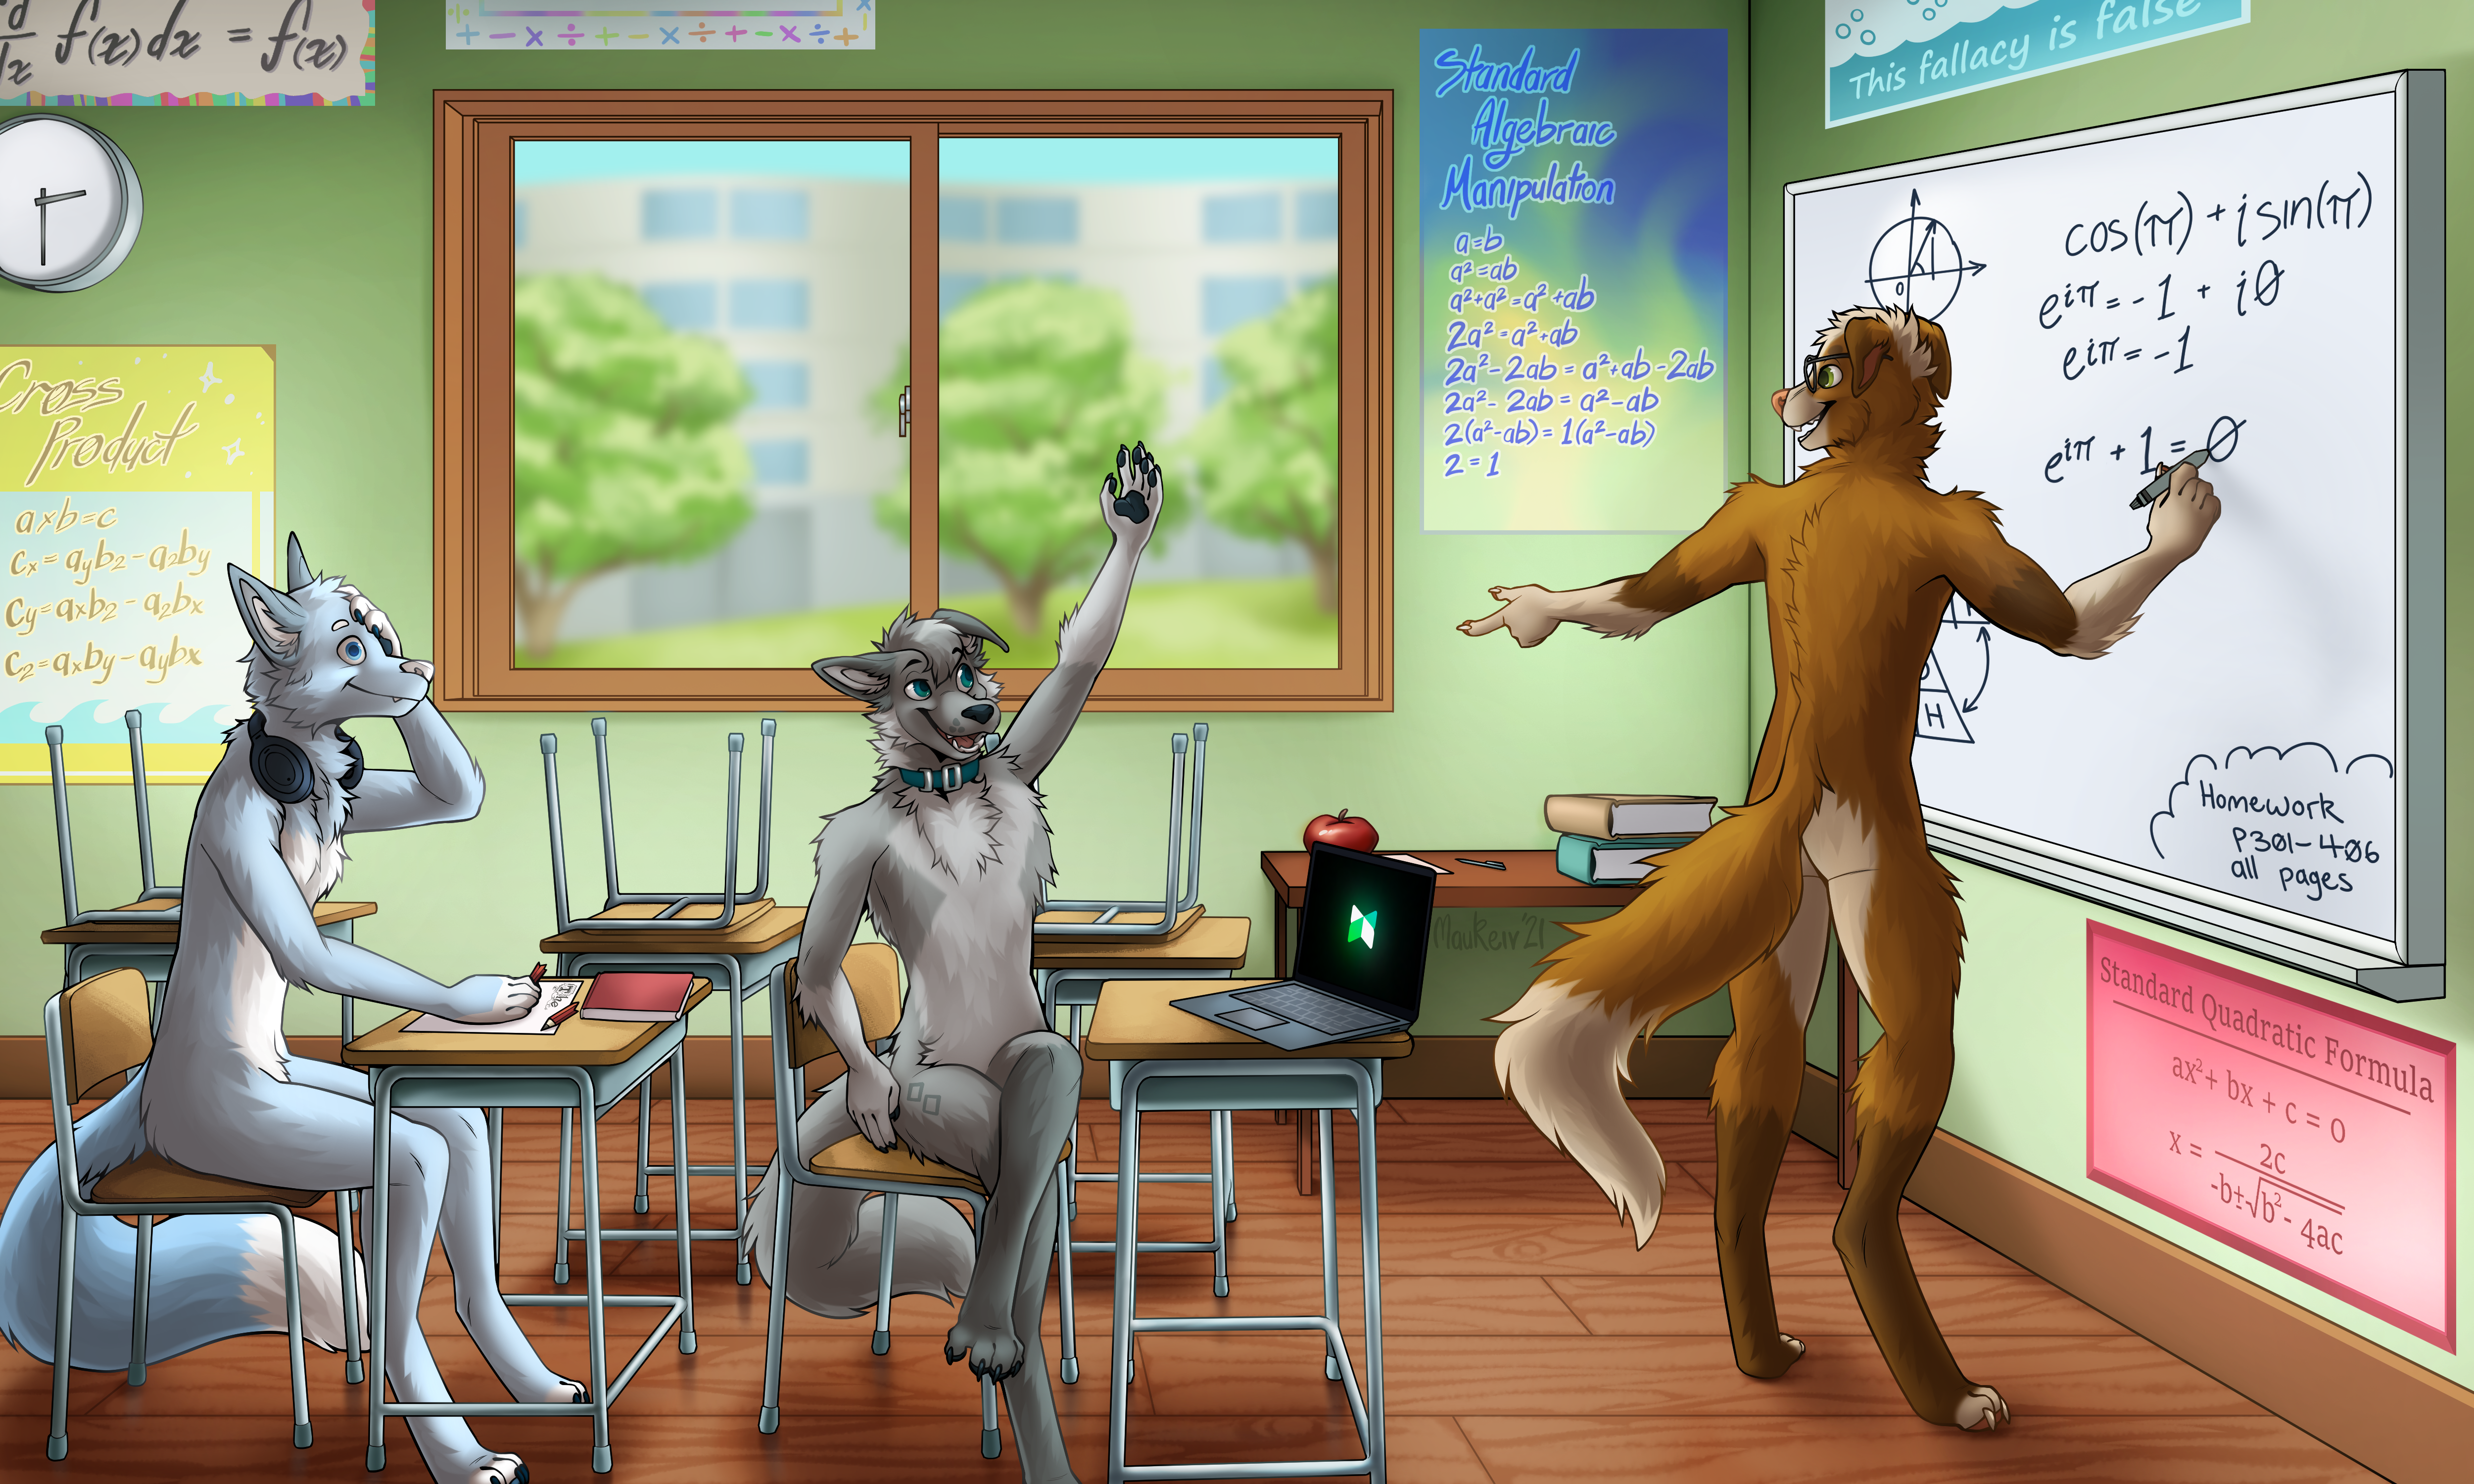 Trey, Dan and Frost are in a maths classroom. Trey is writing equations on a whiteboard, and pointing to Dan who has their hand raised at their desk. Frost sits lost at the desk behind.